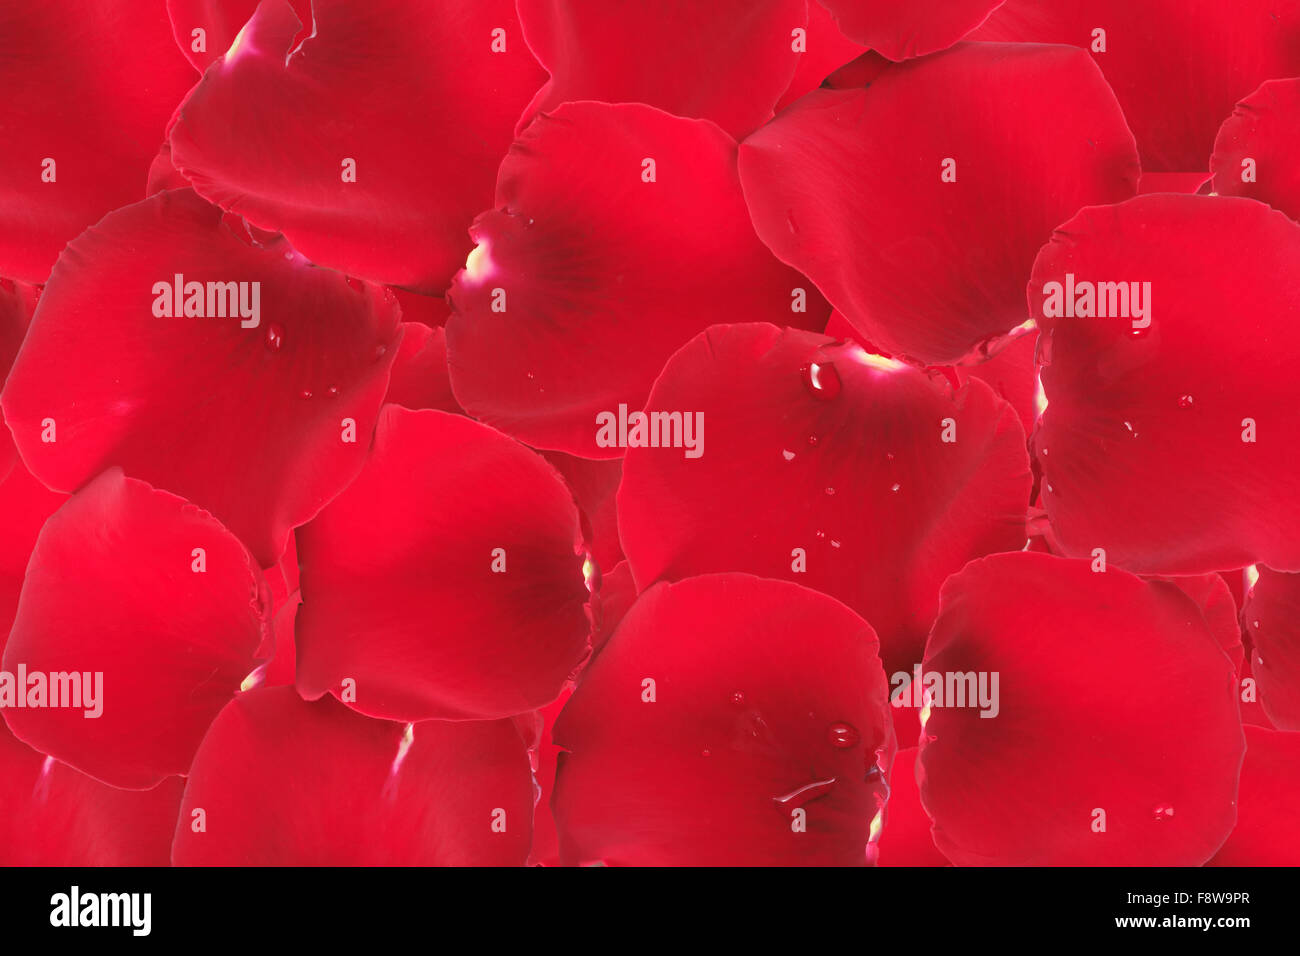 Abstract background of red rose petals Stock Photo